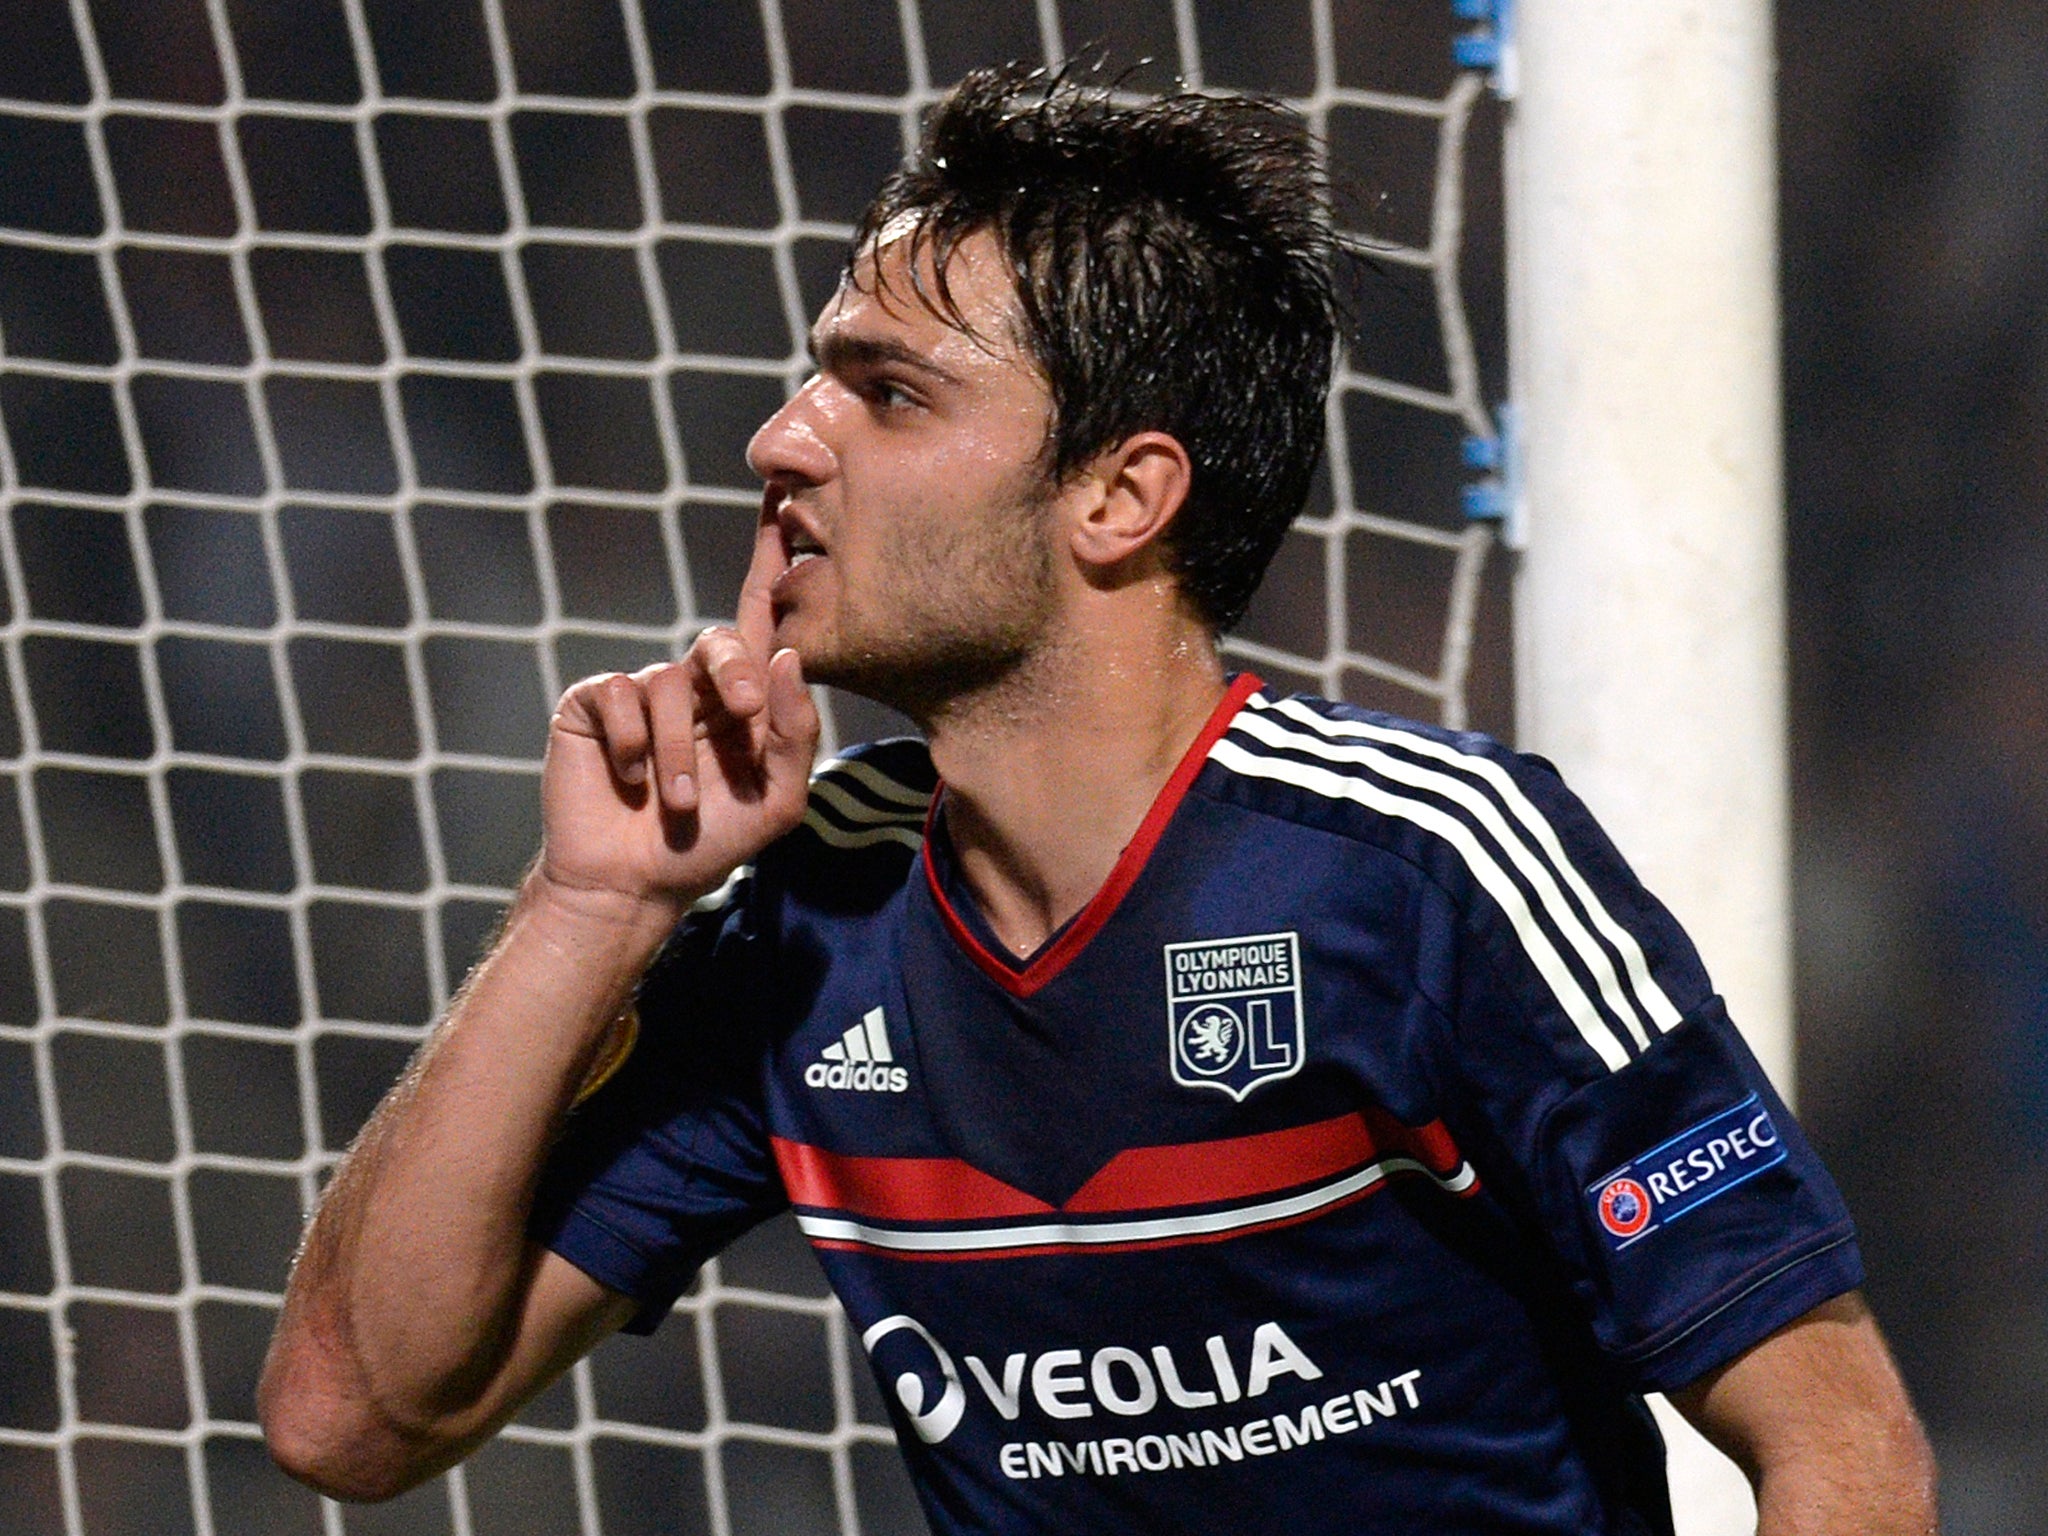 Newcastle have moved to replace Yohan Cabaye by making an offer for Lyon midfielder Clement Grenier